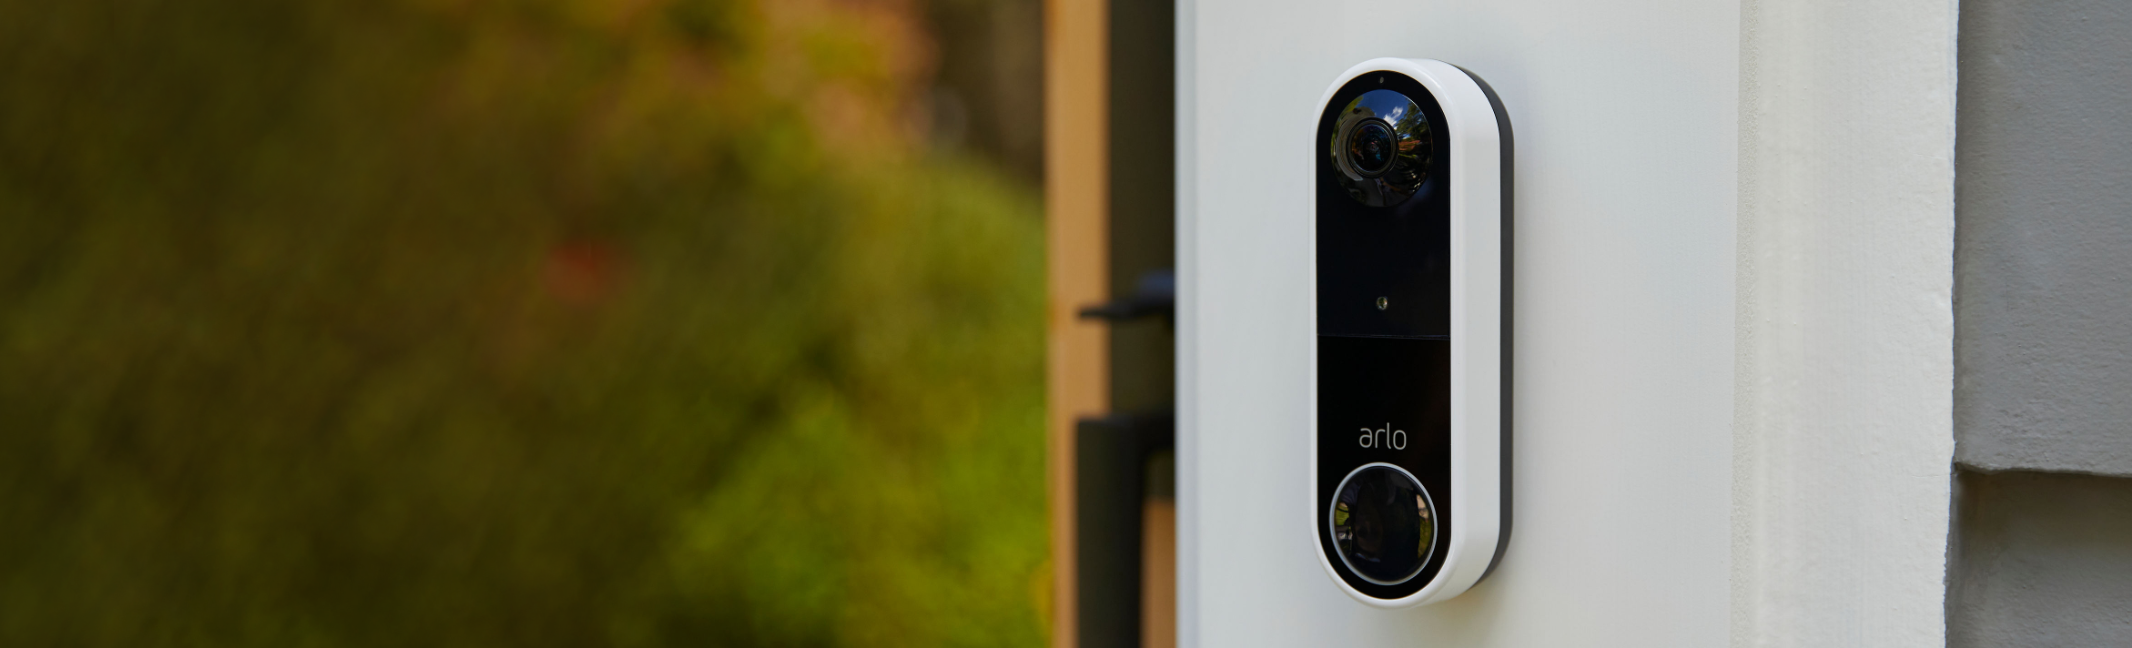 The Arlo video doorbell installed next to the front door of a house